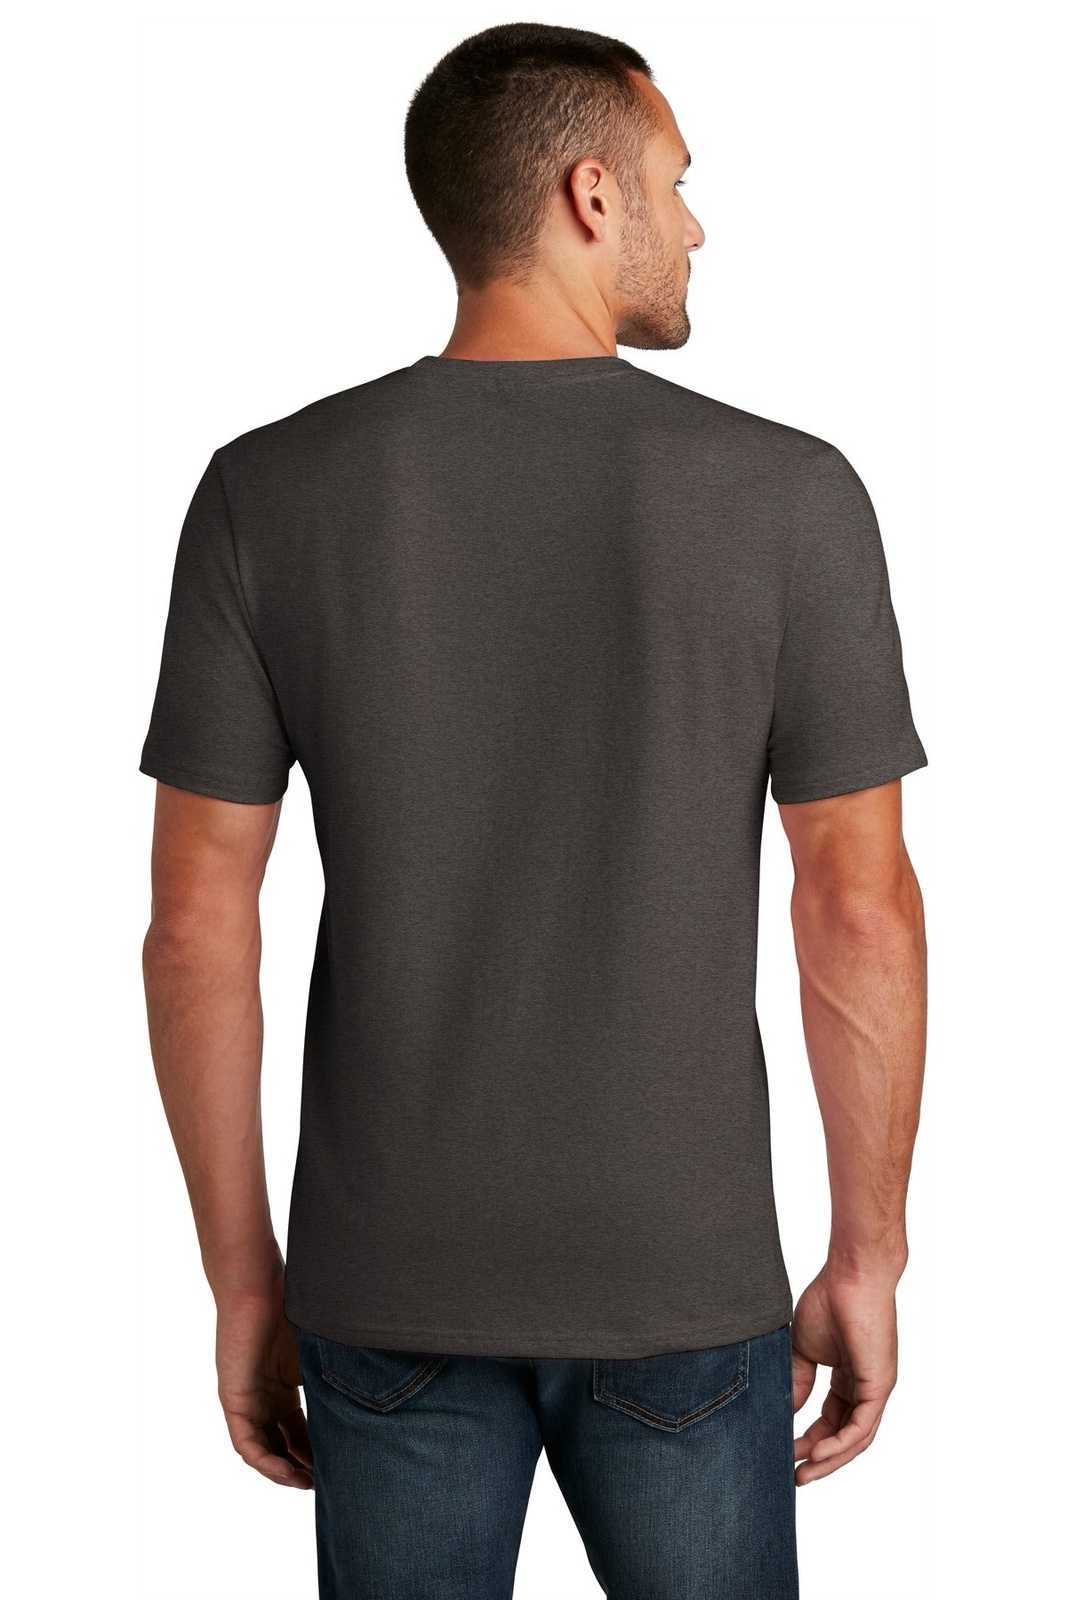 District DT7500 Flex Tee - Heathered Charcoal - HIT a Double - 2